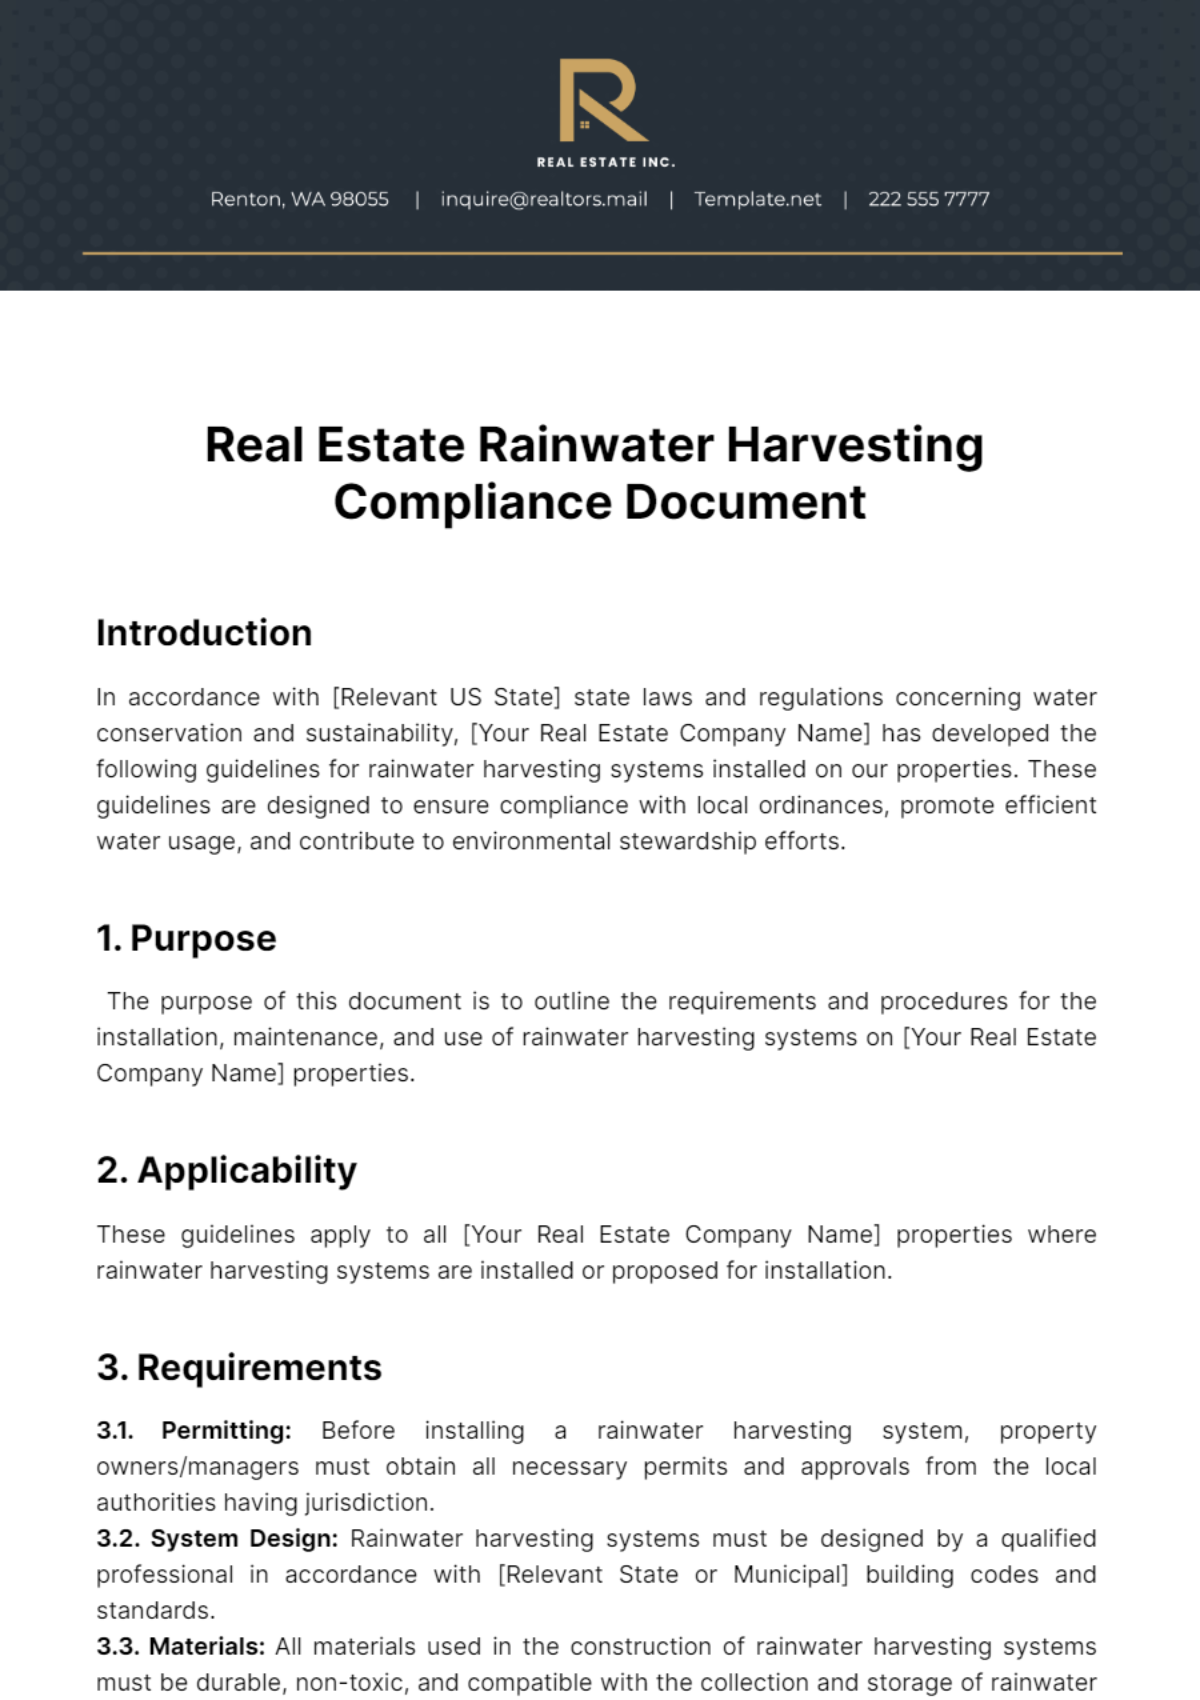 Real Estate Rainwater Harvesting Compliance Document Template